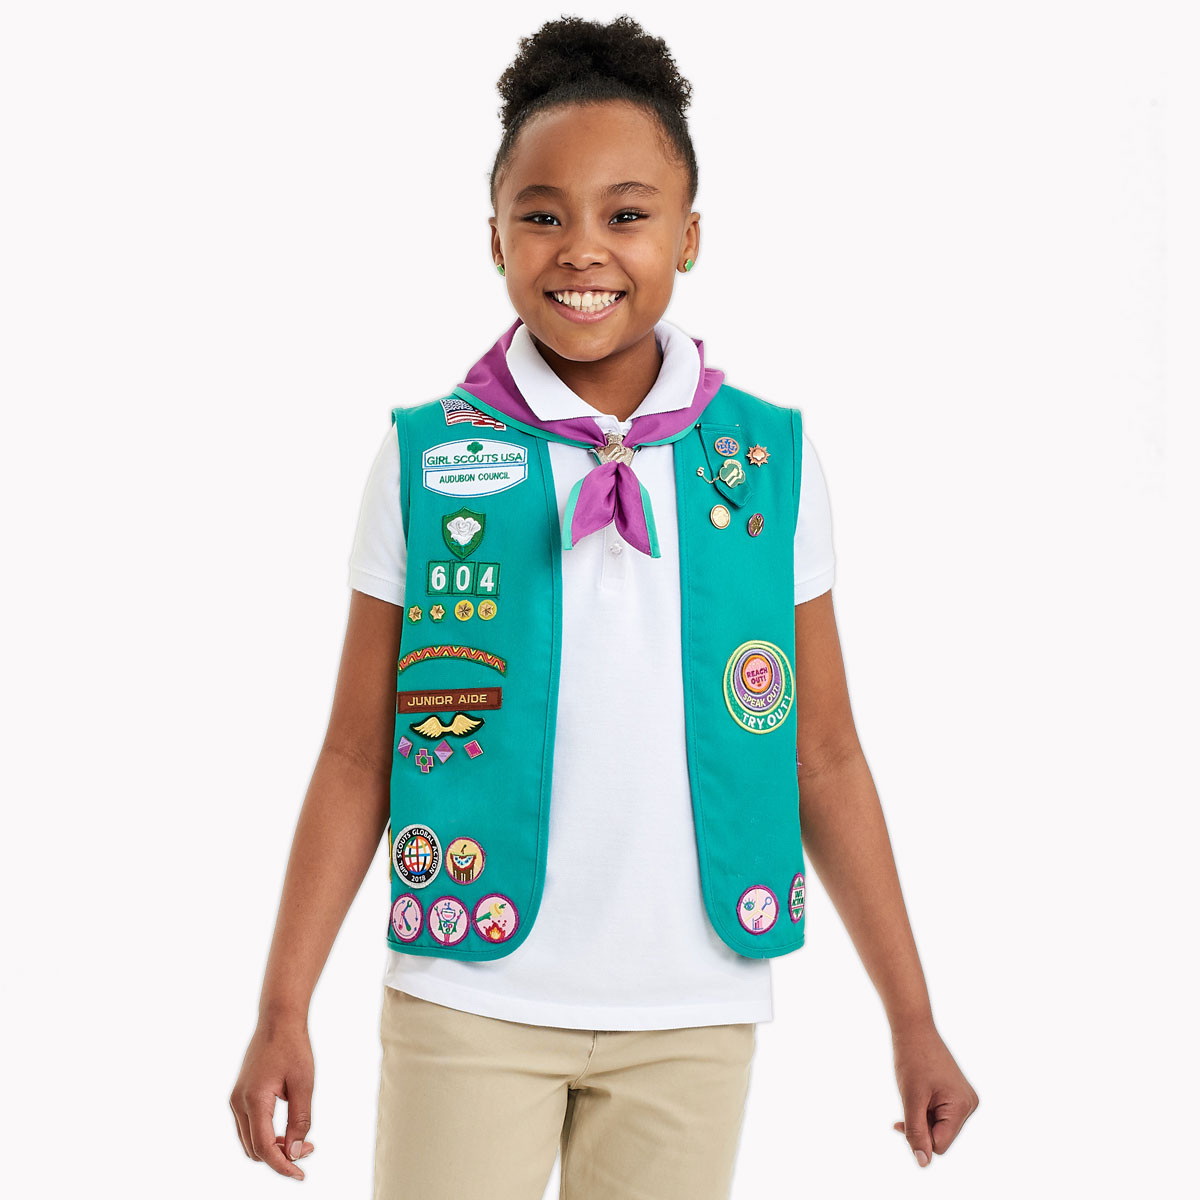 Girl Scouts 0055-4 Official Vest, Girl's, XL, Cotton/Polyester, Green - 3